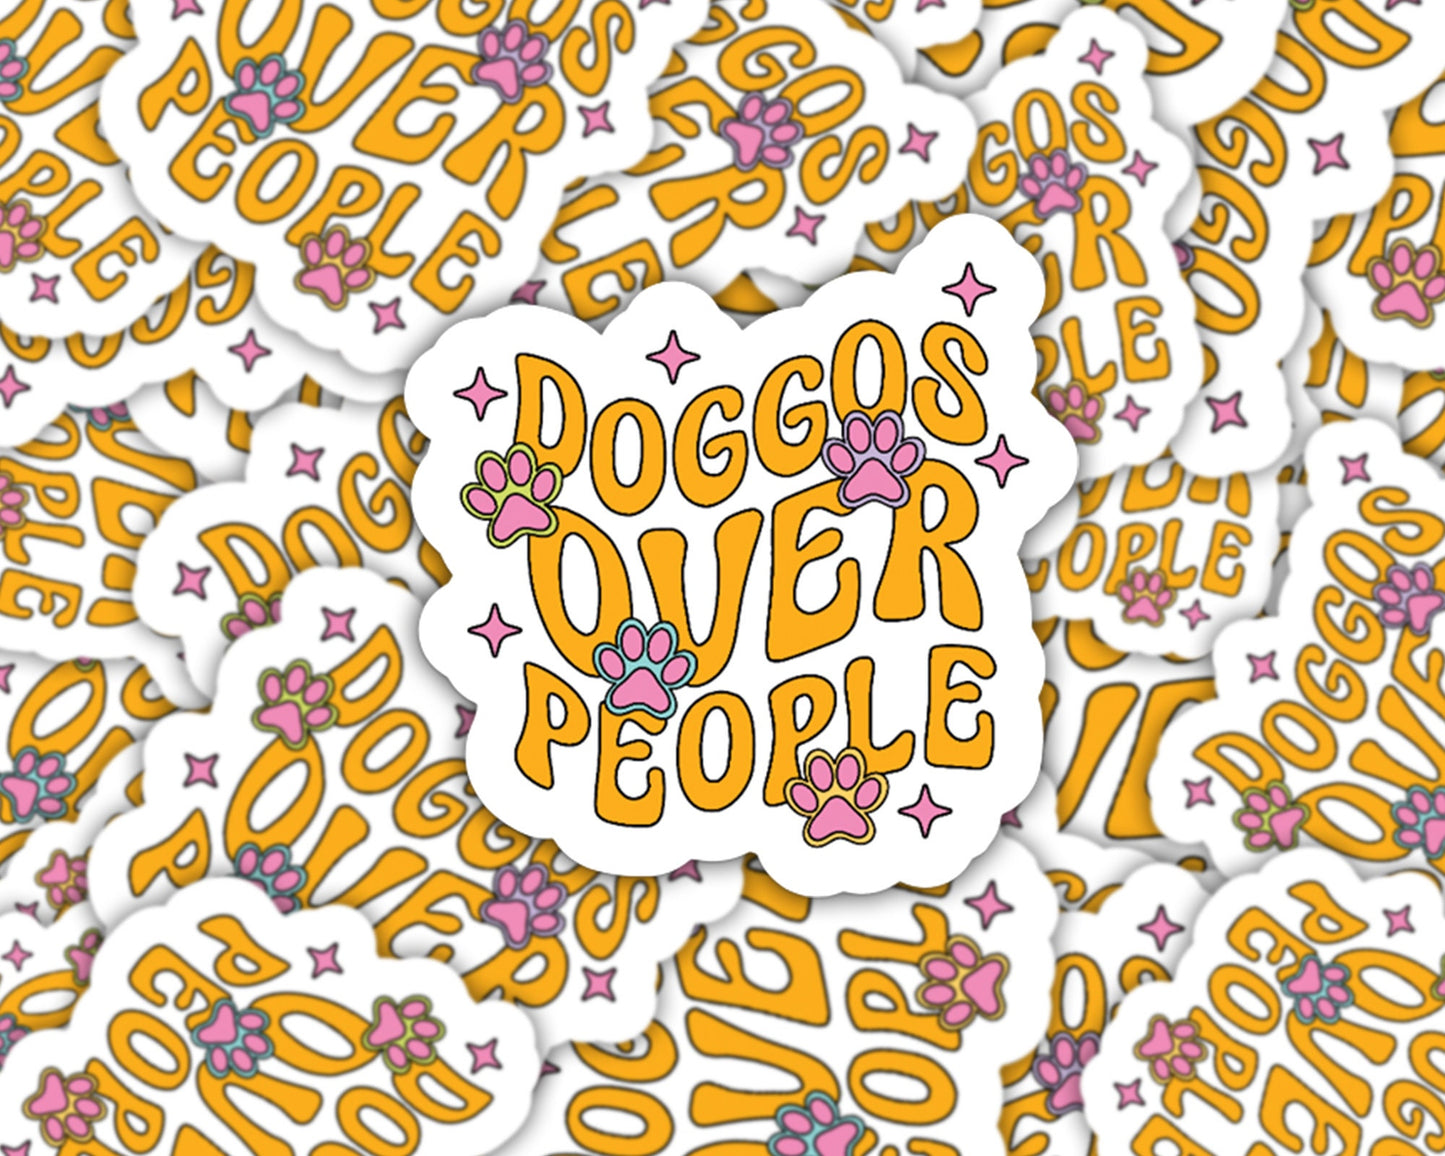 doggos over people, dog stickers, dog lover gifts, pet shop stickers, dog mom, dogs over people, goldendoodle stickers, pittie mom